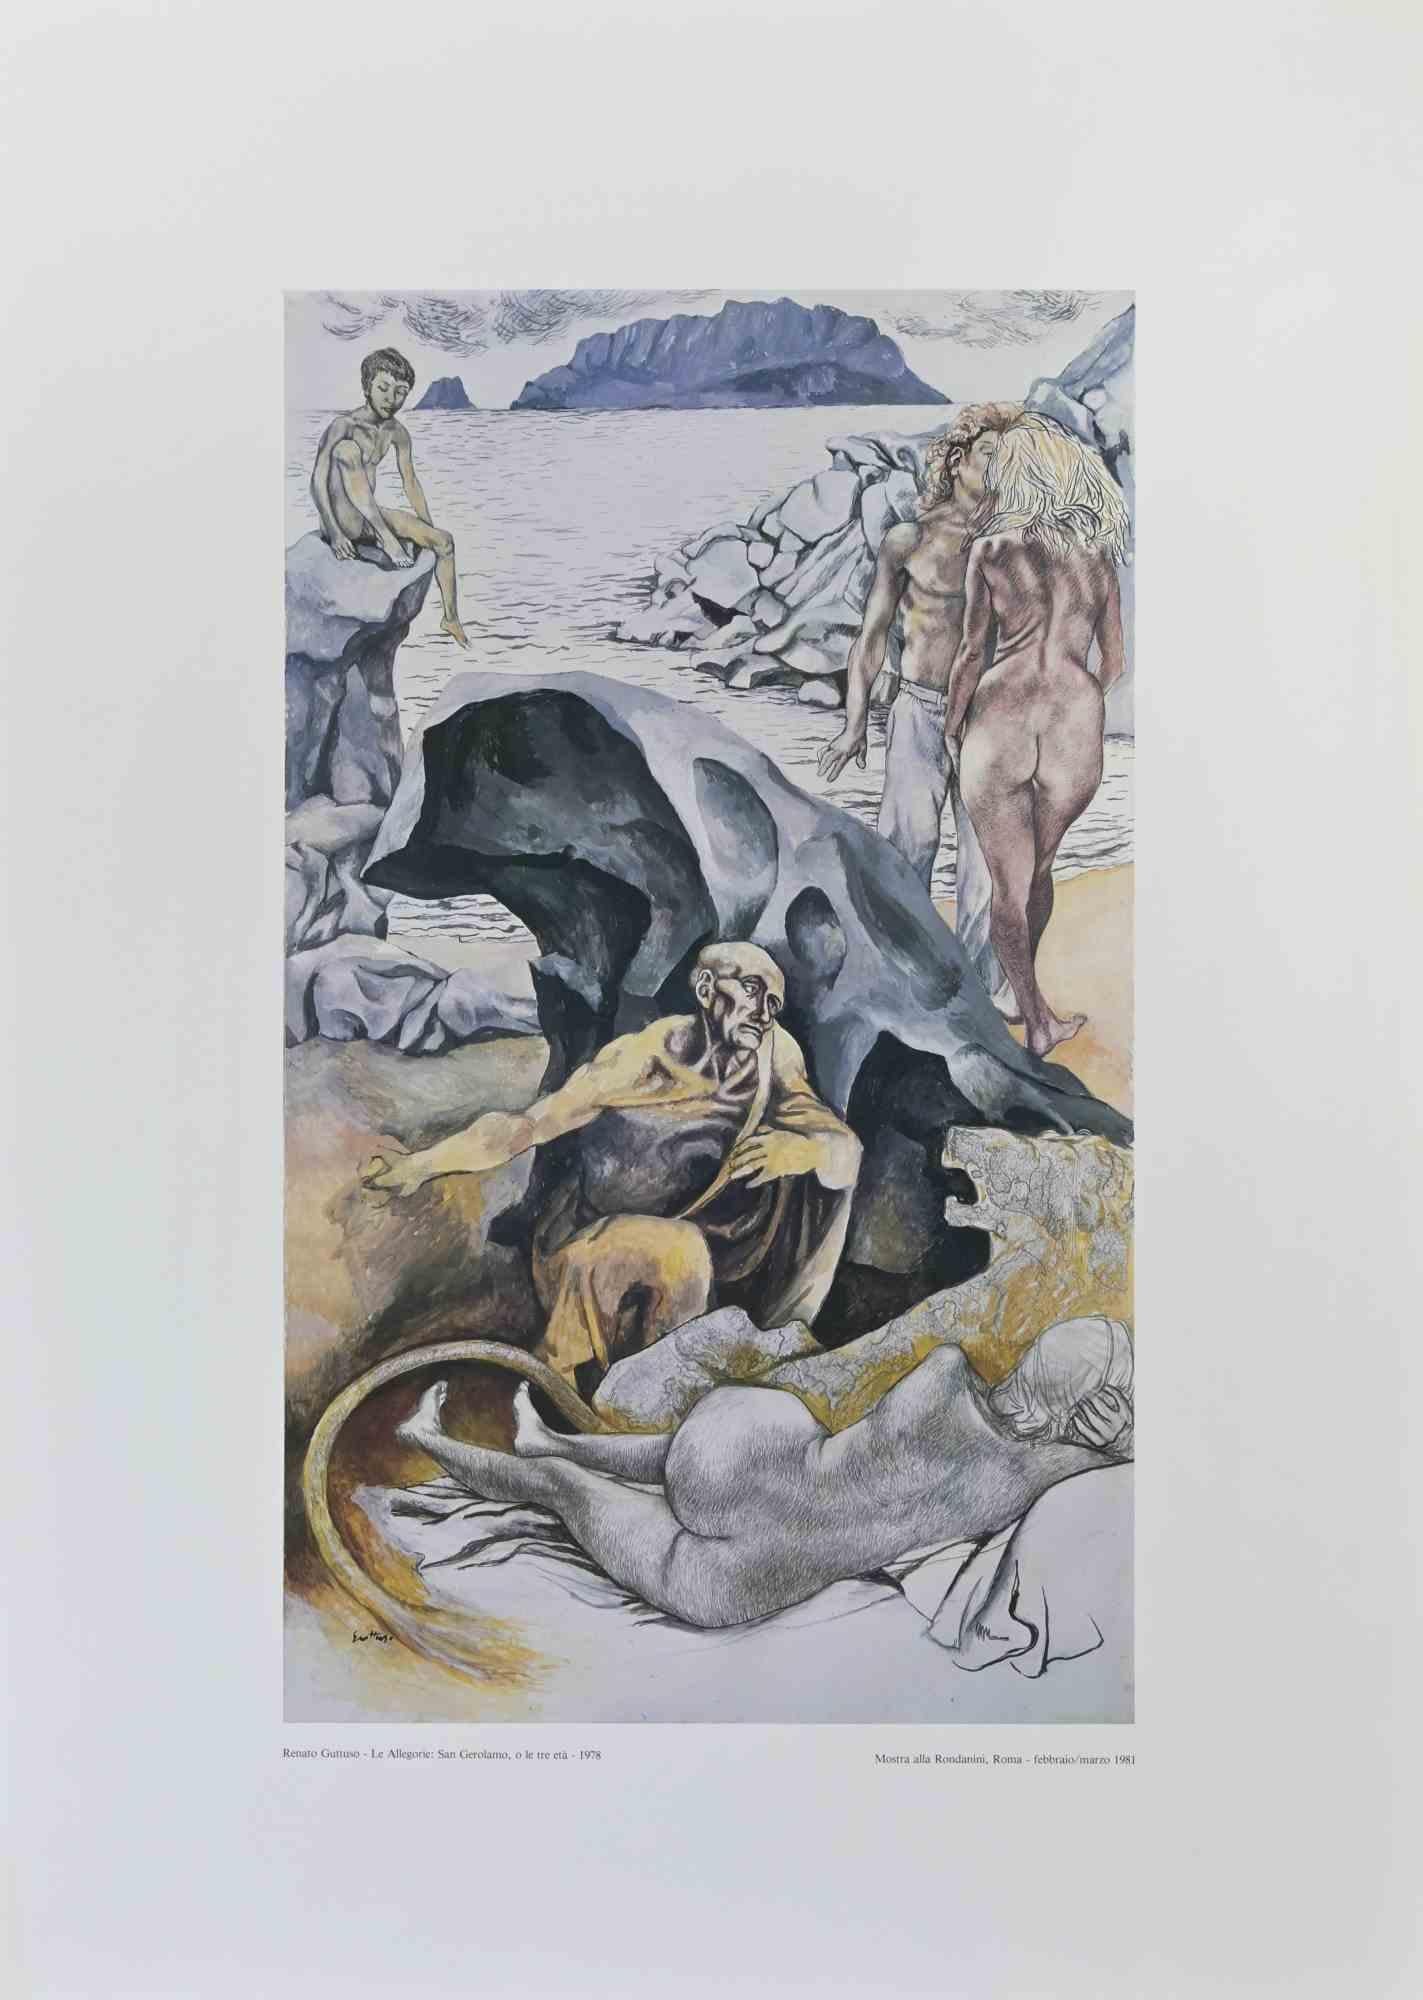 Le Allegorie: San Gerolamo, o le tre età   is a vintage poster realized by the Italian artist  Renato Guttuso  (Bagheria, 1911 – Rome, 1987) in  1981

Original Colored Offset on paper. 

The artwork was realized on the occasion of the exhibition